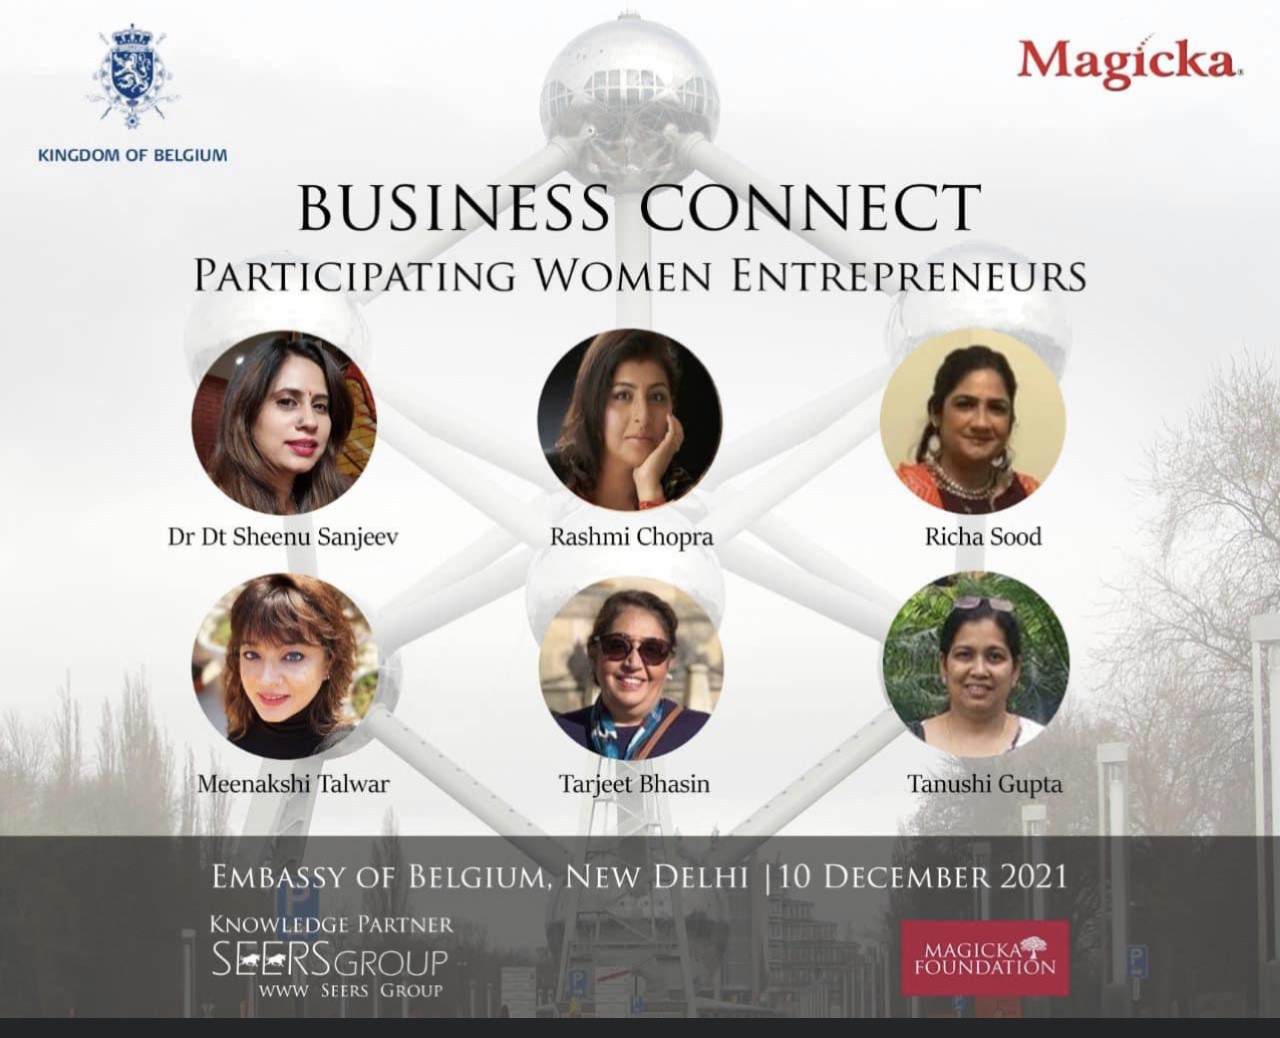 Magicka Business Connect, The Embassy of Belgium